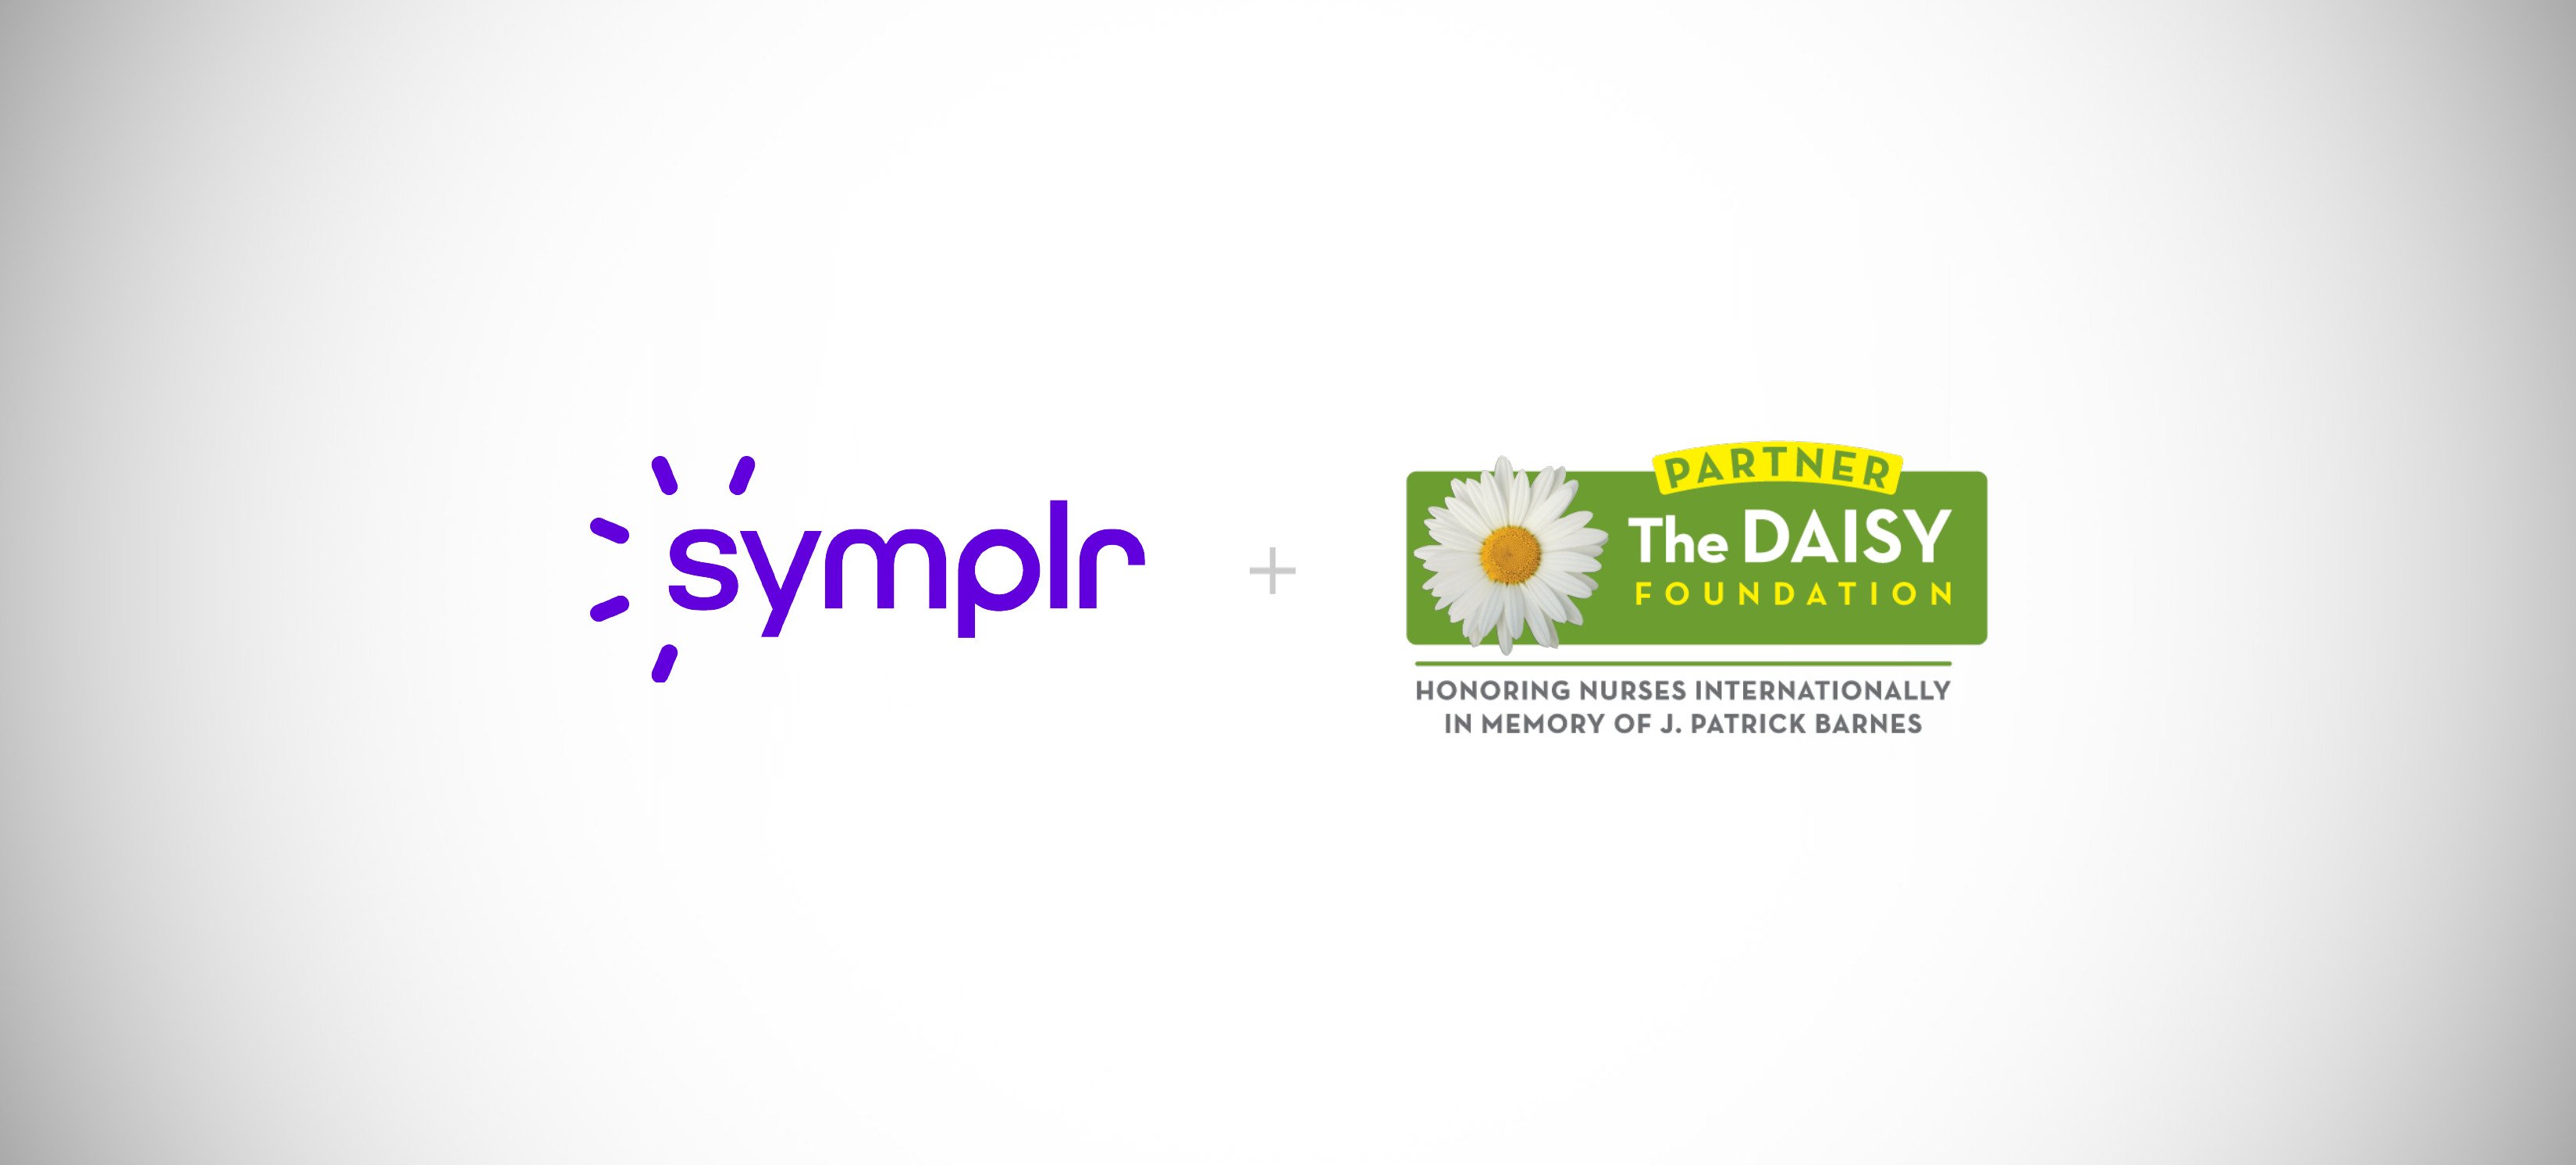 symplr's Karlene Kerfoot Honored with DAISY Lifetime Achievement Award